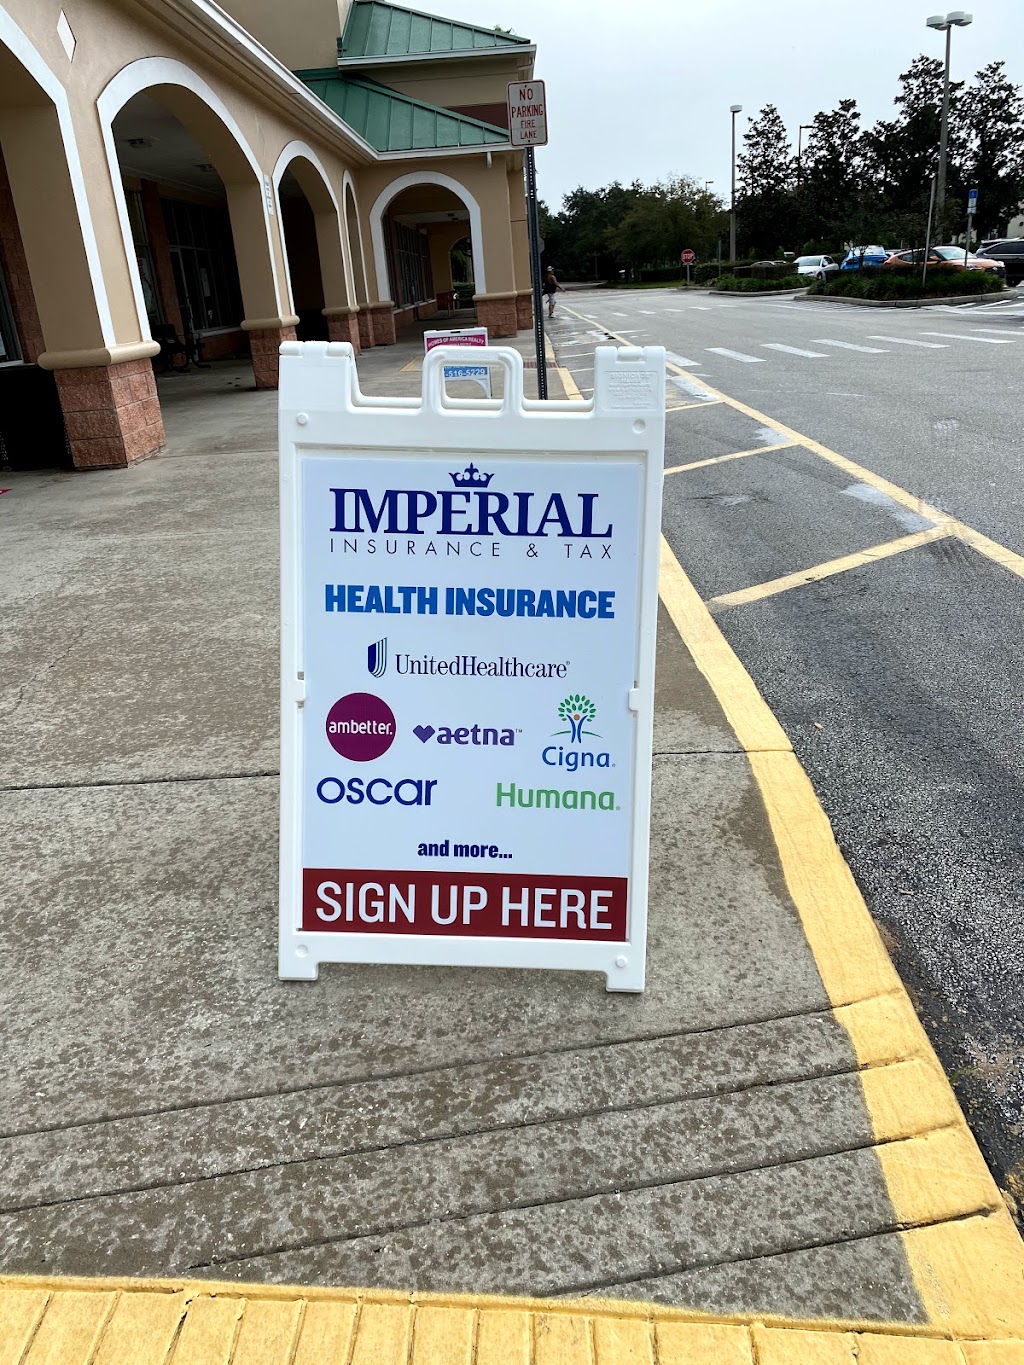 Imperial Insurance & Tax | 17445 US-192 Suite 13, Clermont, FL 34714, USA | Phone: (352) 448-5120